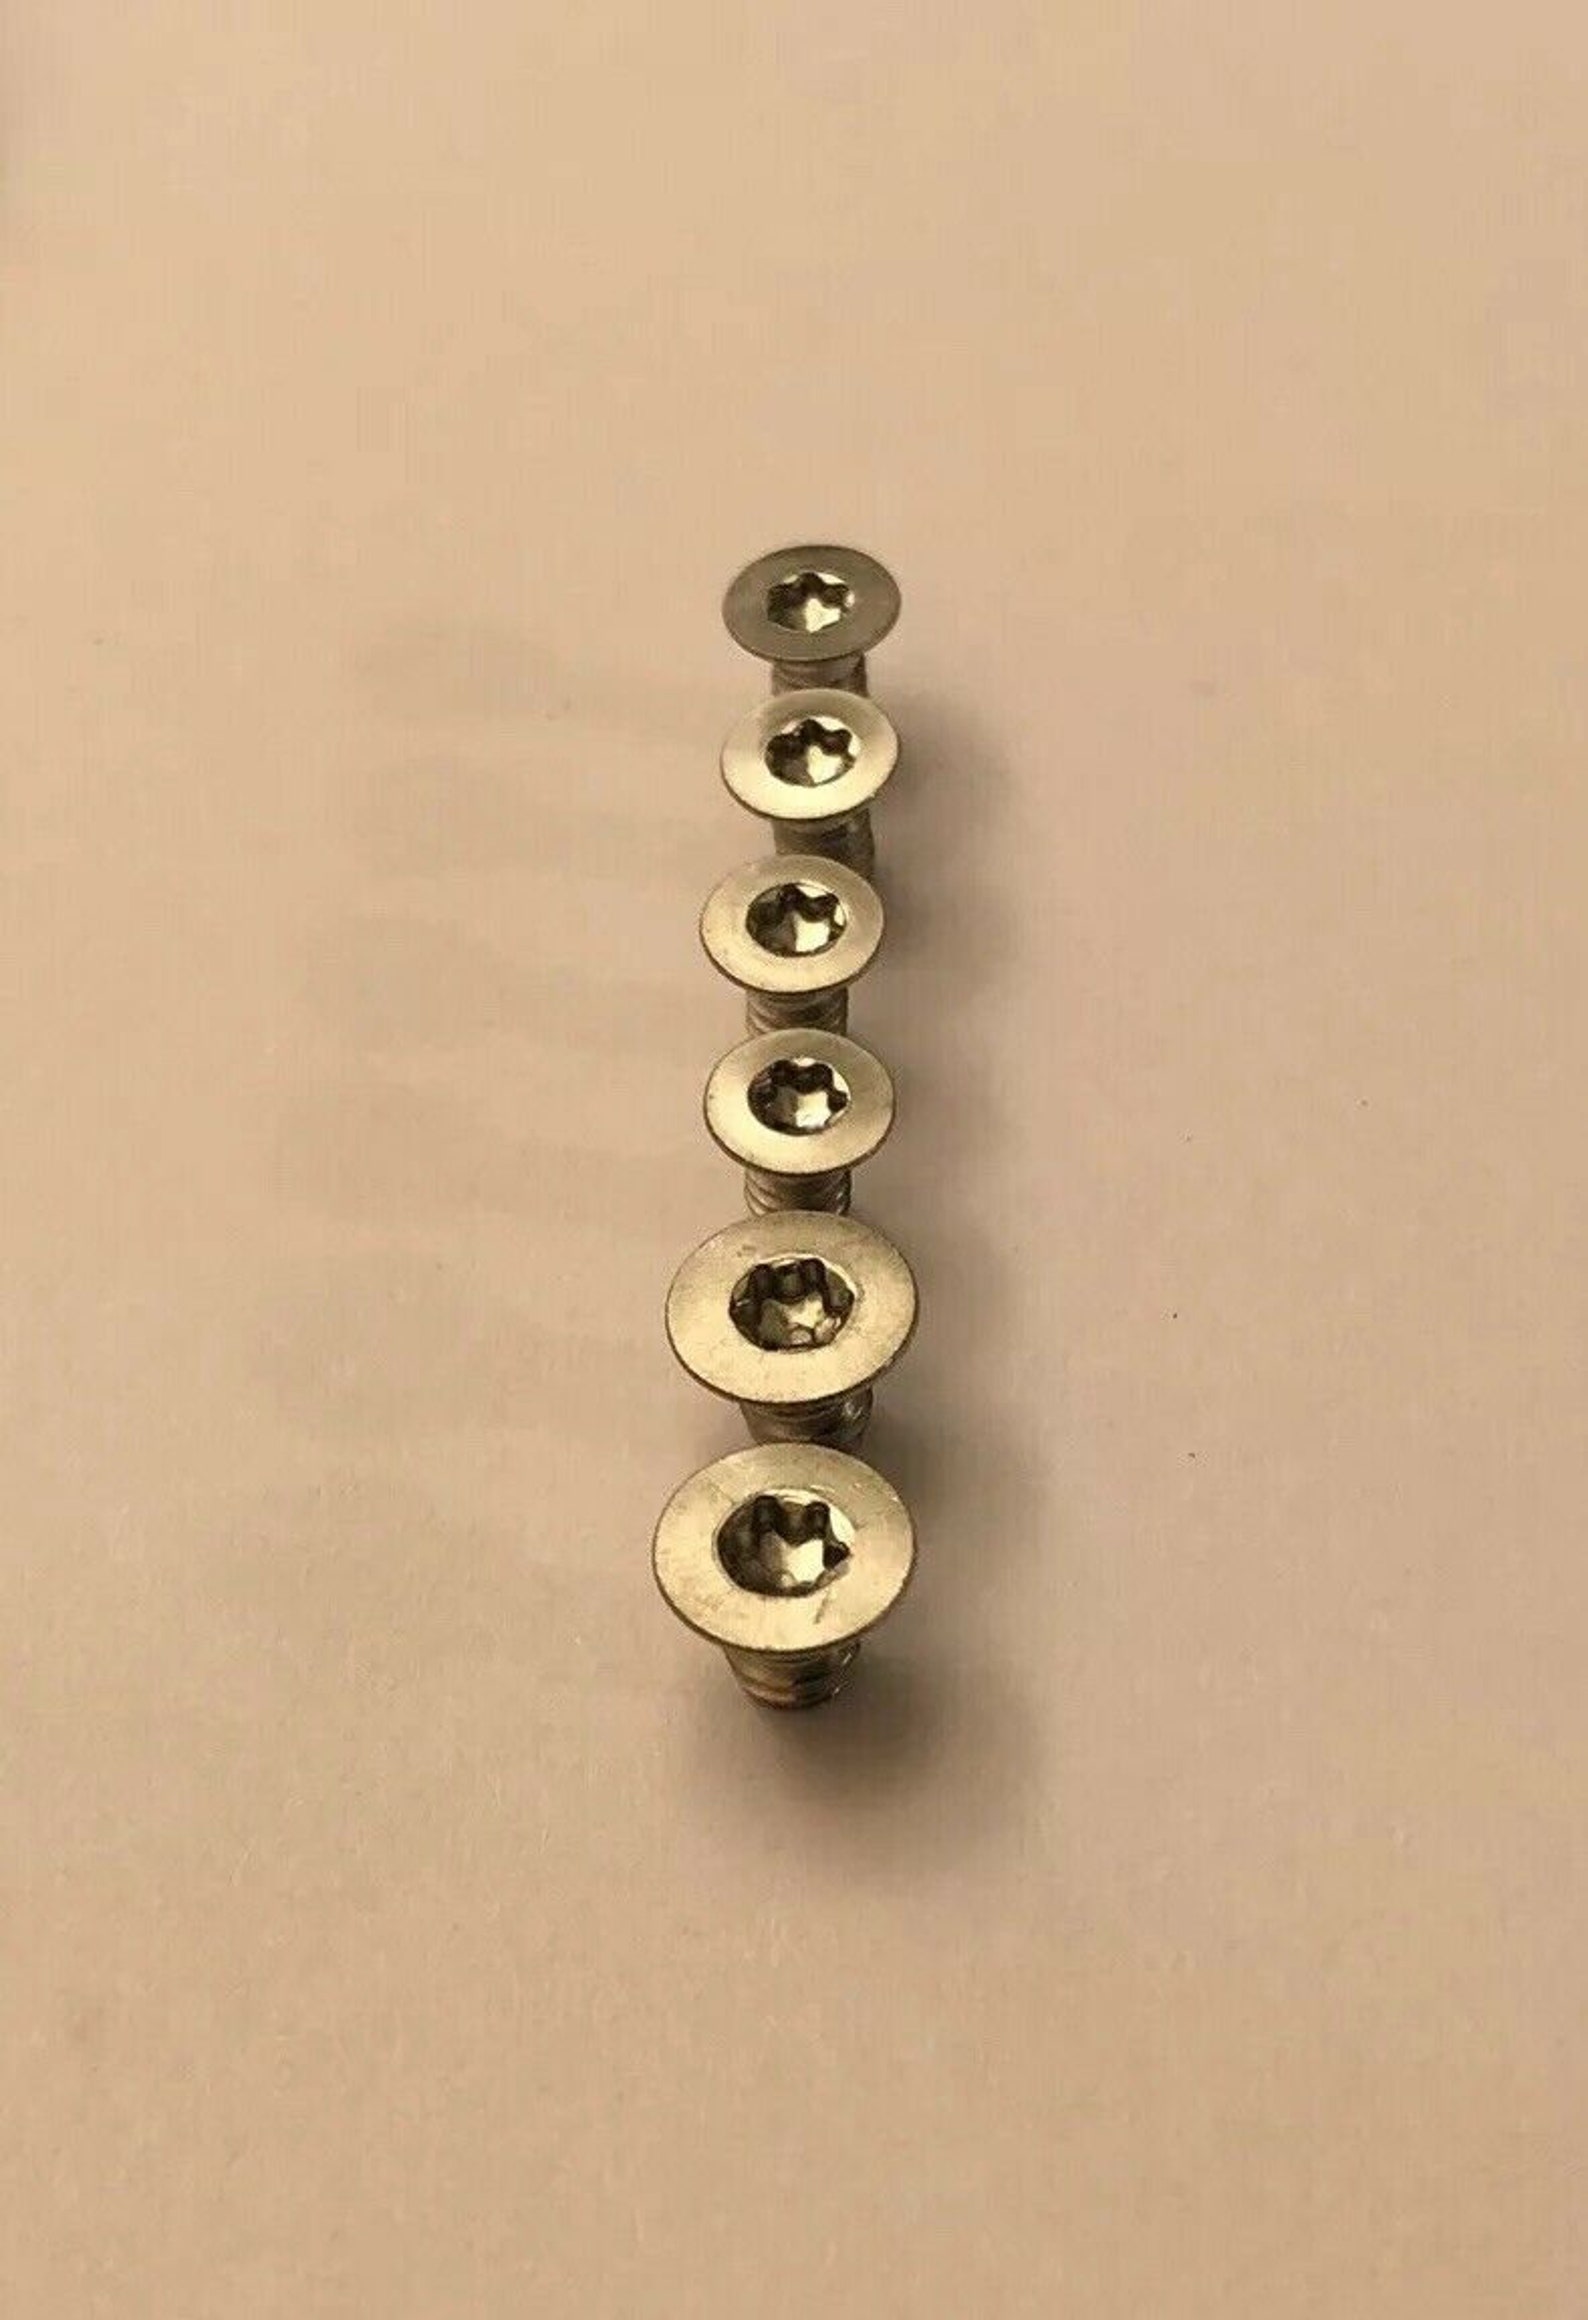 Stainless Steel Replacement Scale & Pivot Screws for Spyderco | Etsy